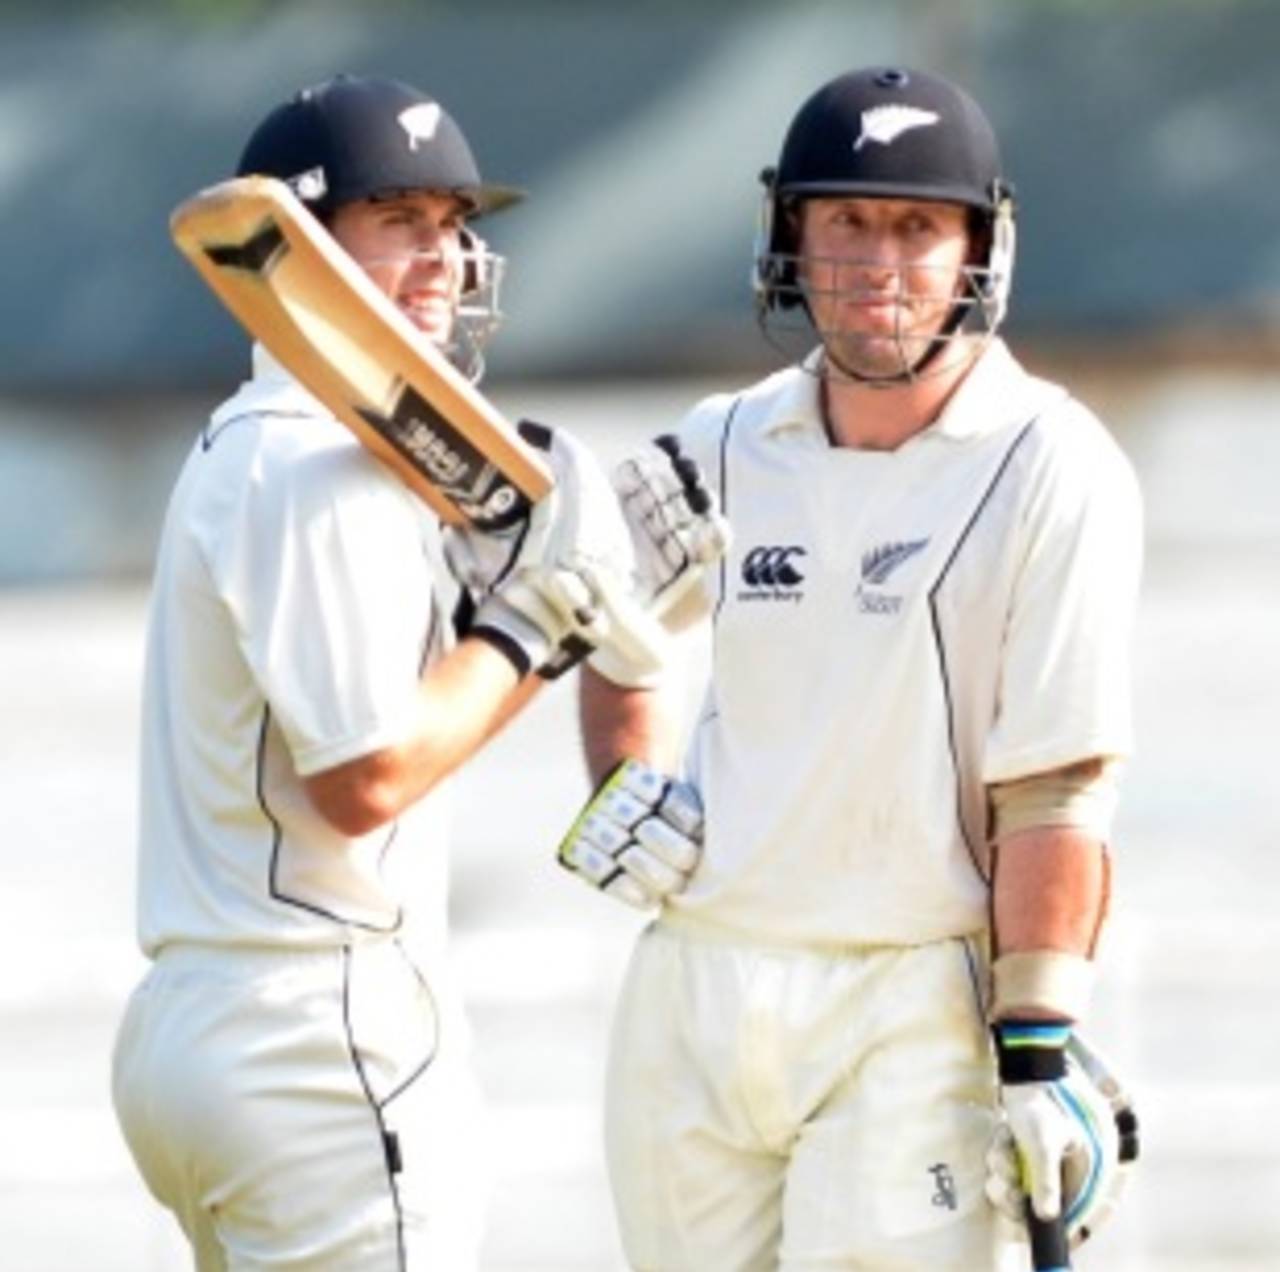 Luke Ronchi's twin fifties could not help Wellington across the line, but Todd Astle picked up 14 wickets to steer Canterbury to victory&nbsp;&nbsp;&bull;&nbsp;&nbsp;BCCI